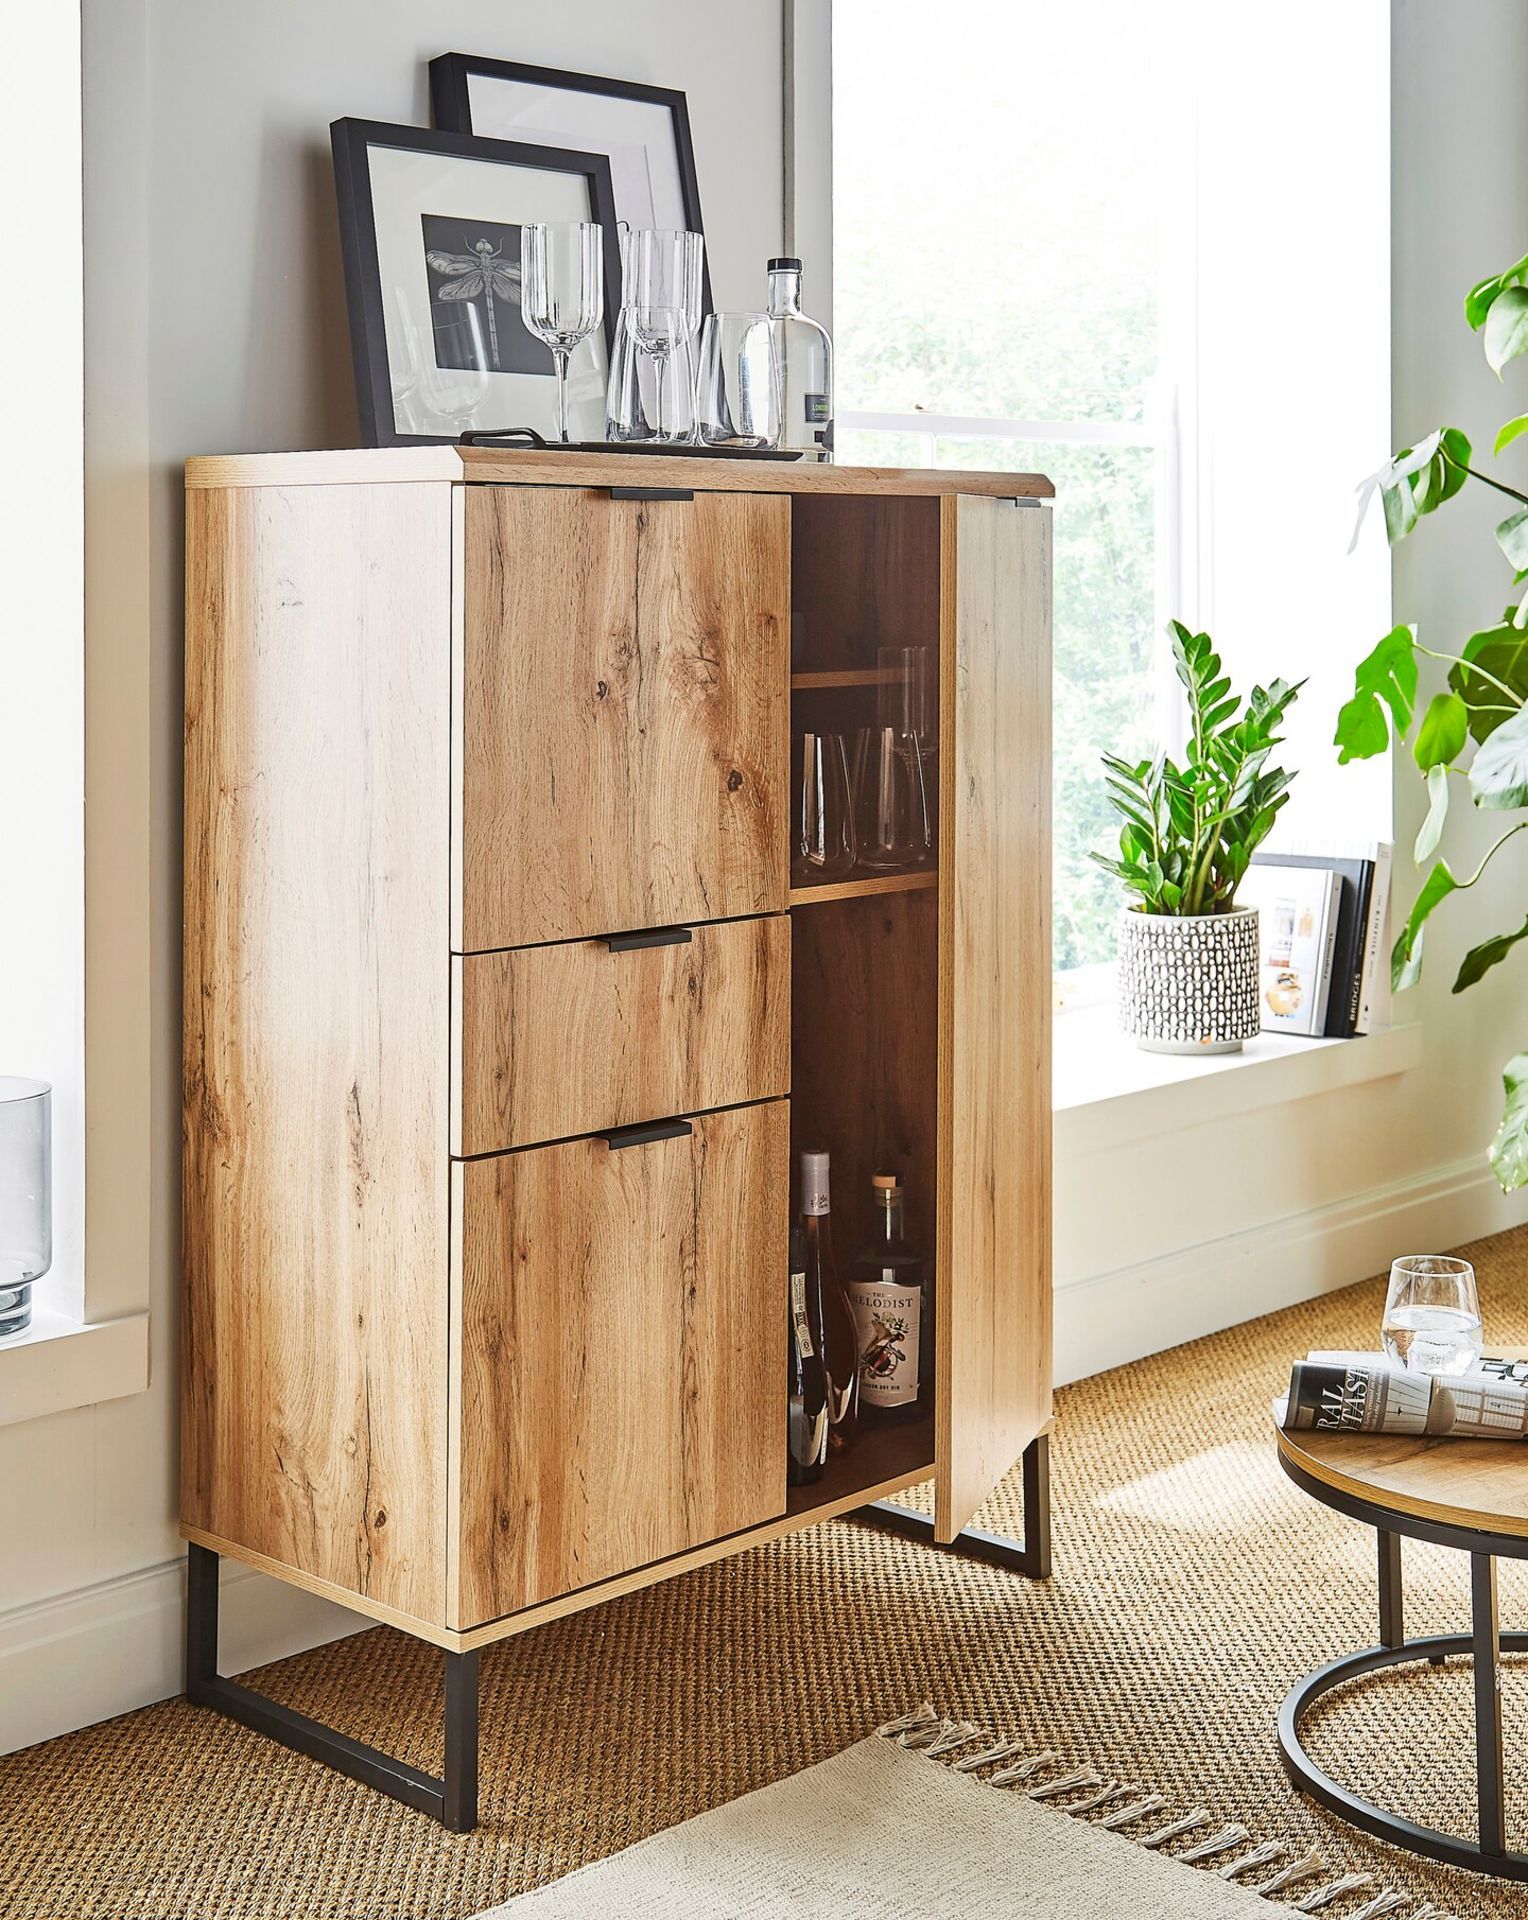 BRAND NEW SHOREDITCH Drinks Cabinet. OAK. RRP £299. The Shoreditch Range is a contemporary and - Image 8 of 8